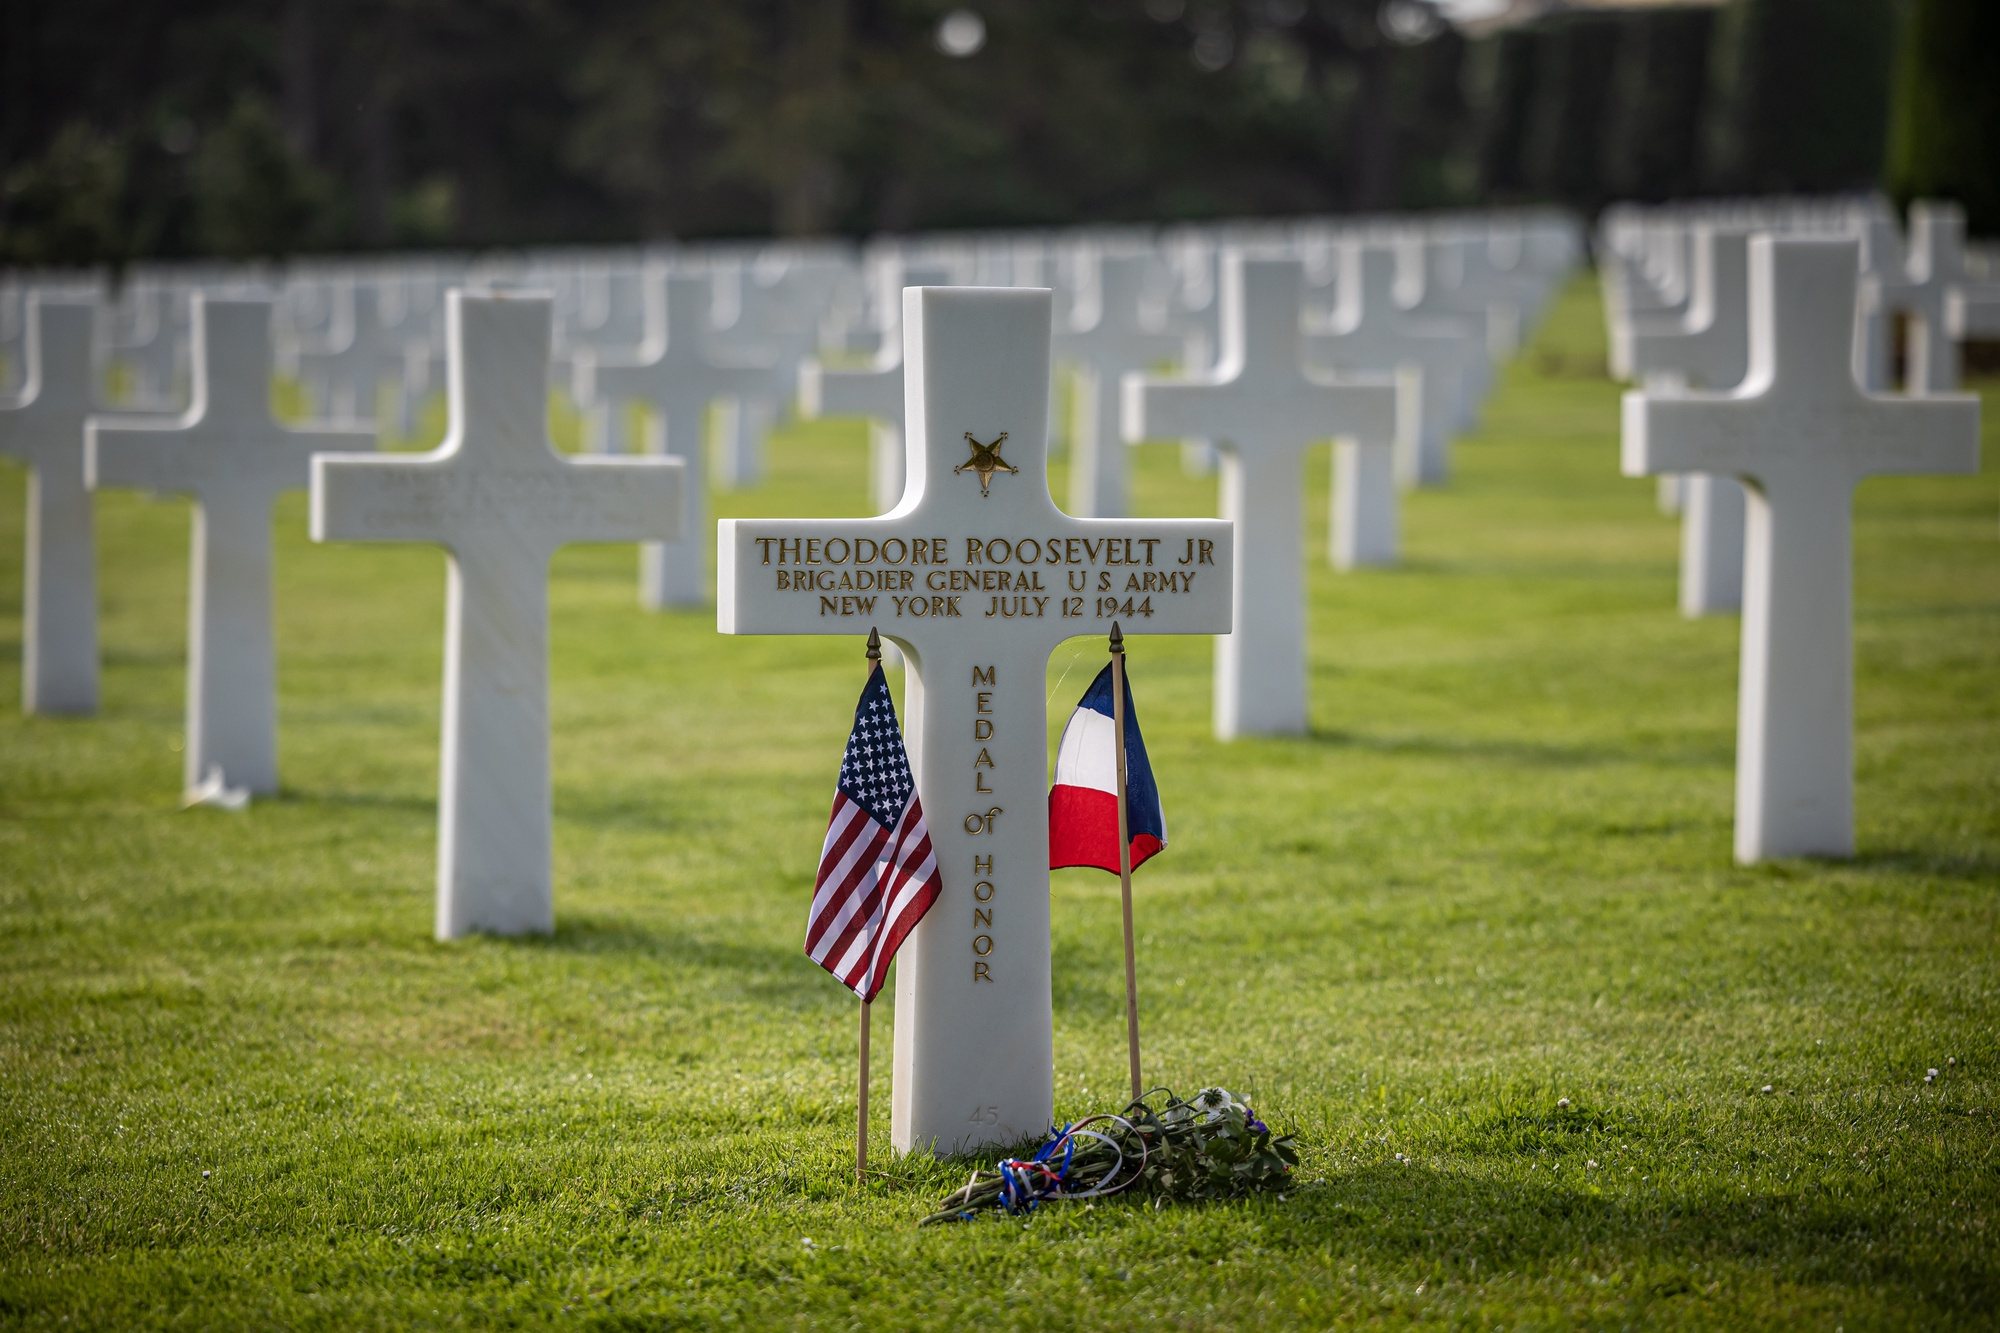 epa11387454 US and French flags are placed on the grave of Theodore Roosevelt Jr., the late military leader and son of American President Theodore Roosevelt, at the American Cemetery ahead of the 80th D-Day anniversary, in Colleville-sur-Mer, Normandy, France, 03 June 2024. World leaders are due to attend memorial events in Normandy, France on 06 June 2024 to mark the 80th anniversary of the D-Day landings, when allied forces invaded German controlled France.  EPA/CHRISTOPHE PETIT TESSON